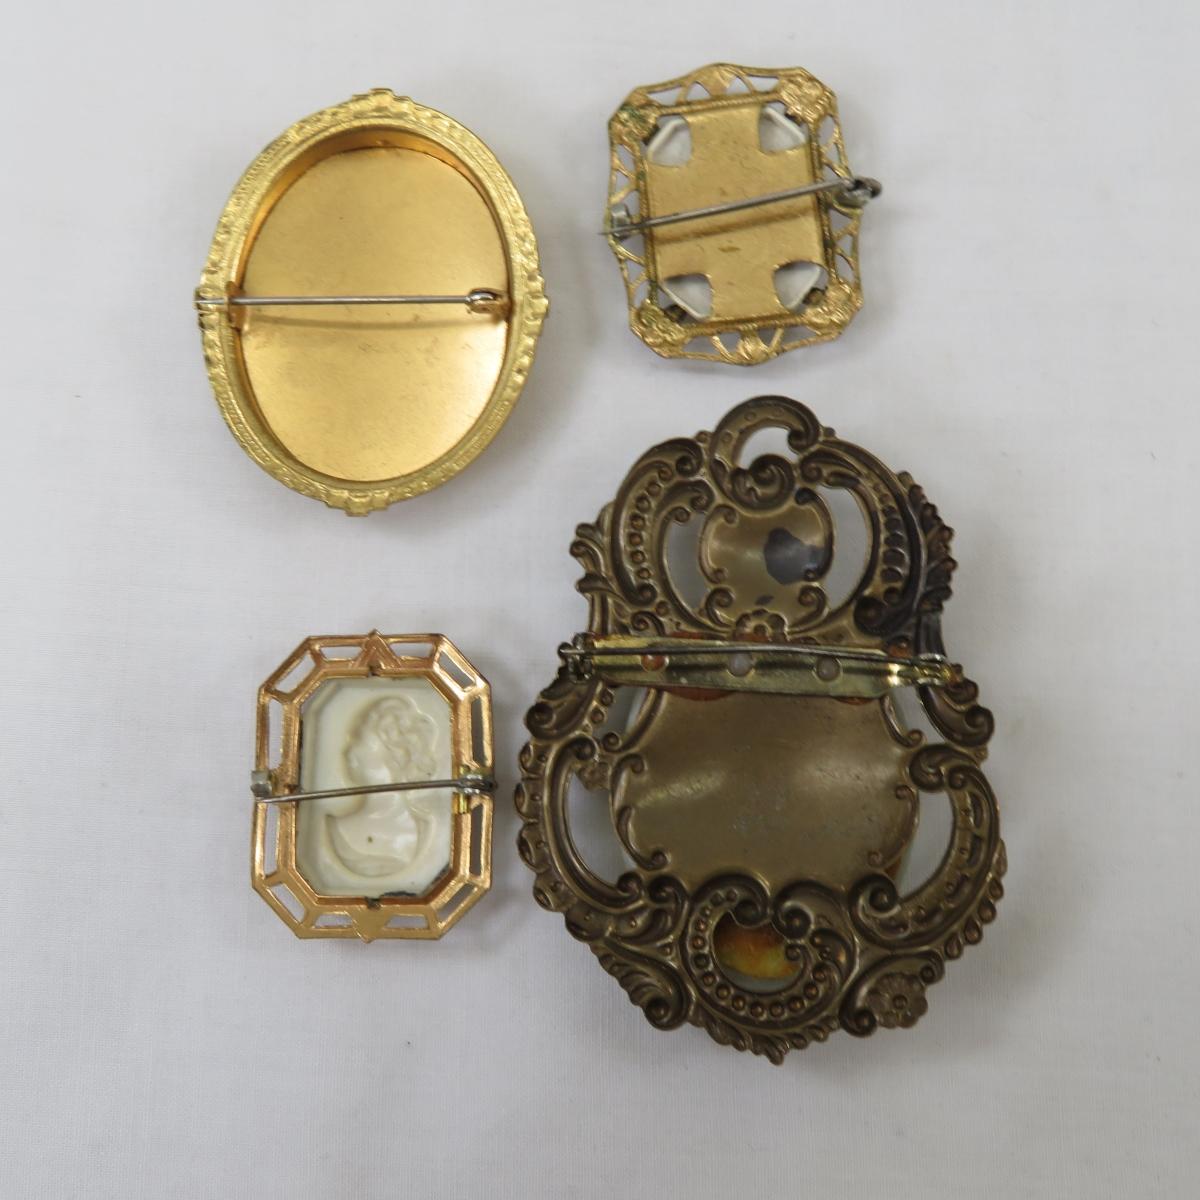 Celluloid Cameo & Sterling Floral Brooches & More